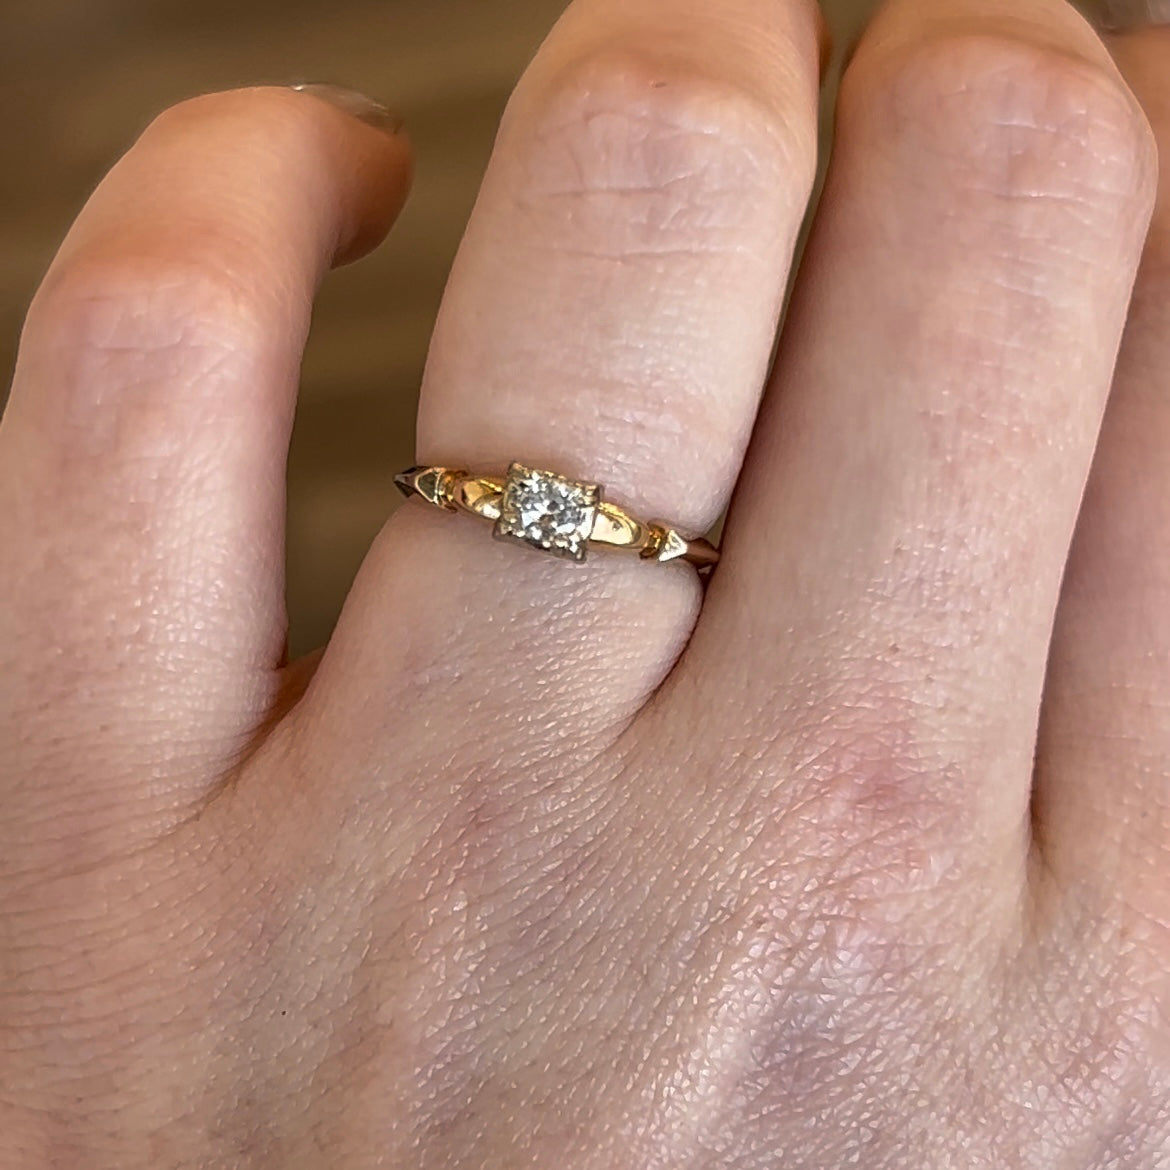 15 Retro Two-Tone Diamond Engagement Ring in 14k/18k Gold